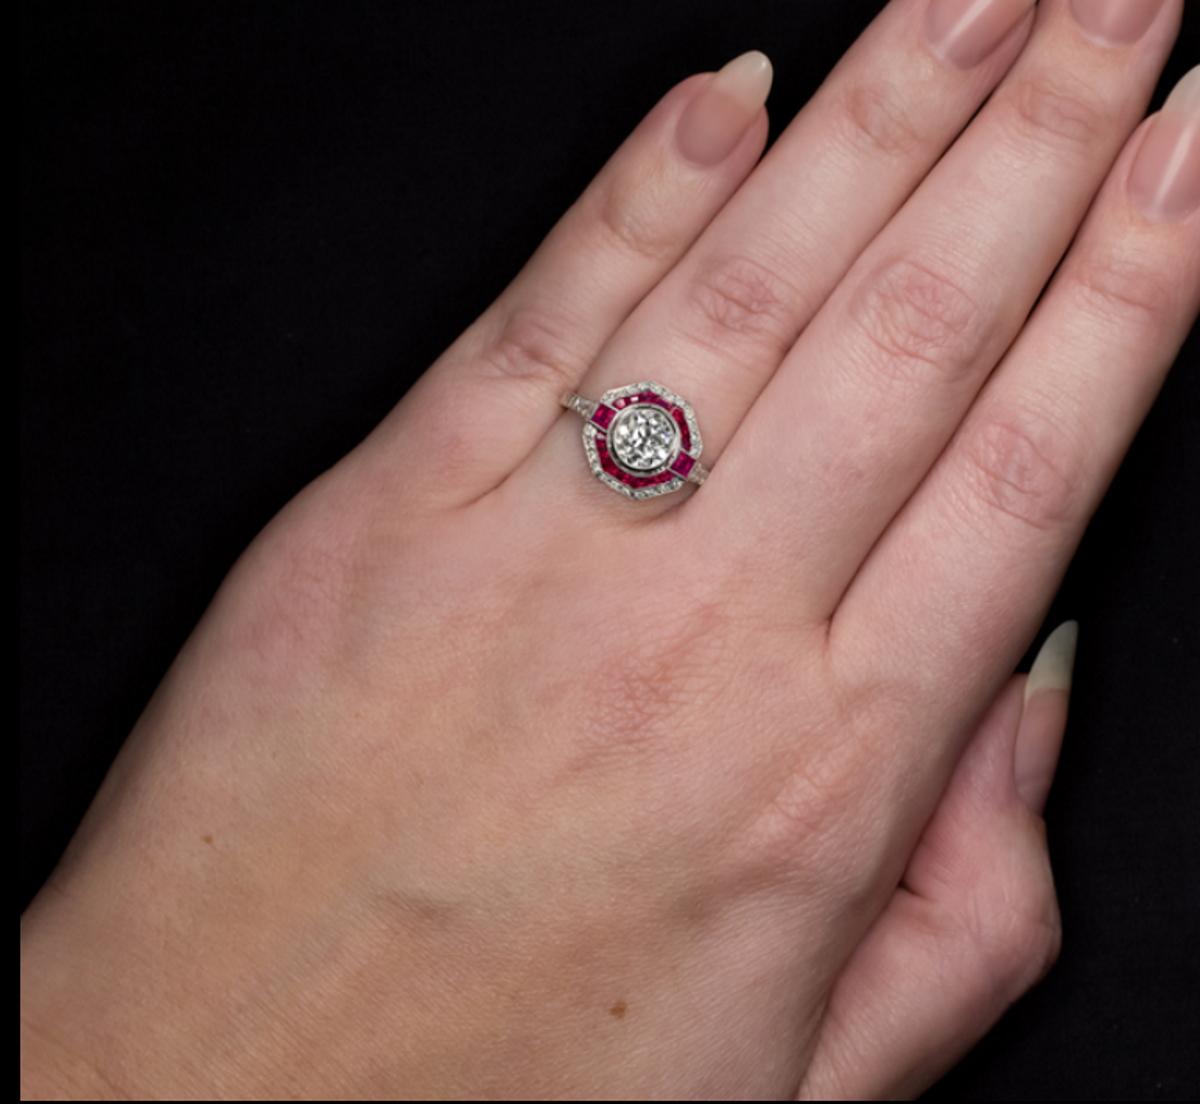 Beautiful ring with an amazing old European cut diamond weighing 1.02 ct. The frame is in platinum and is studded with rubies. The center stone was cut by hand during the 1920s and 1930s.

The ring is of recent construction, and is the work of